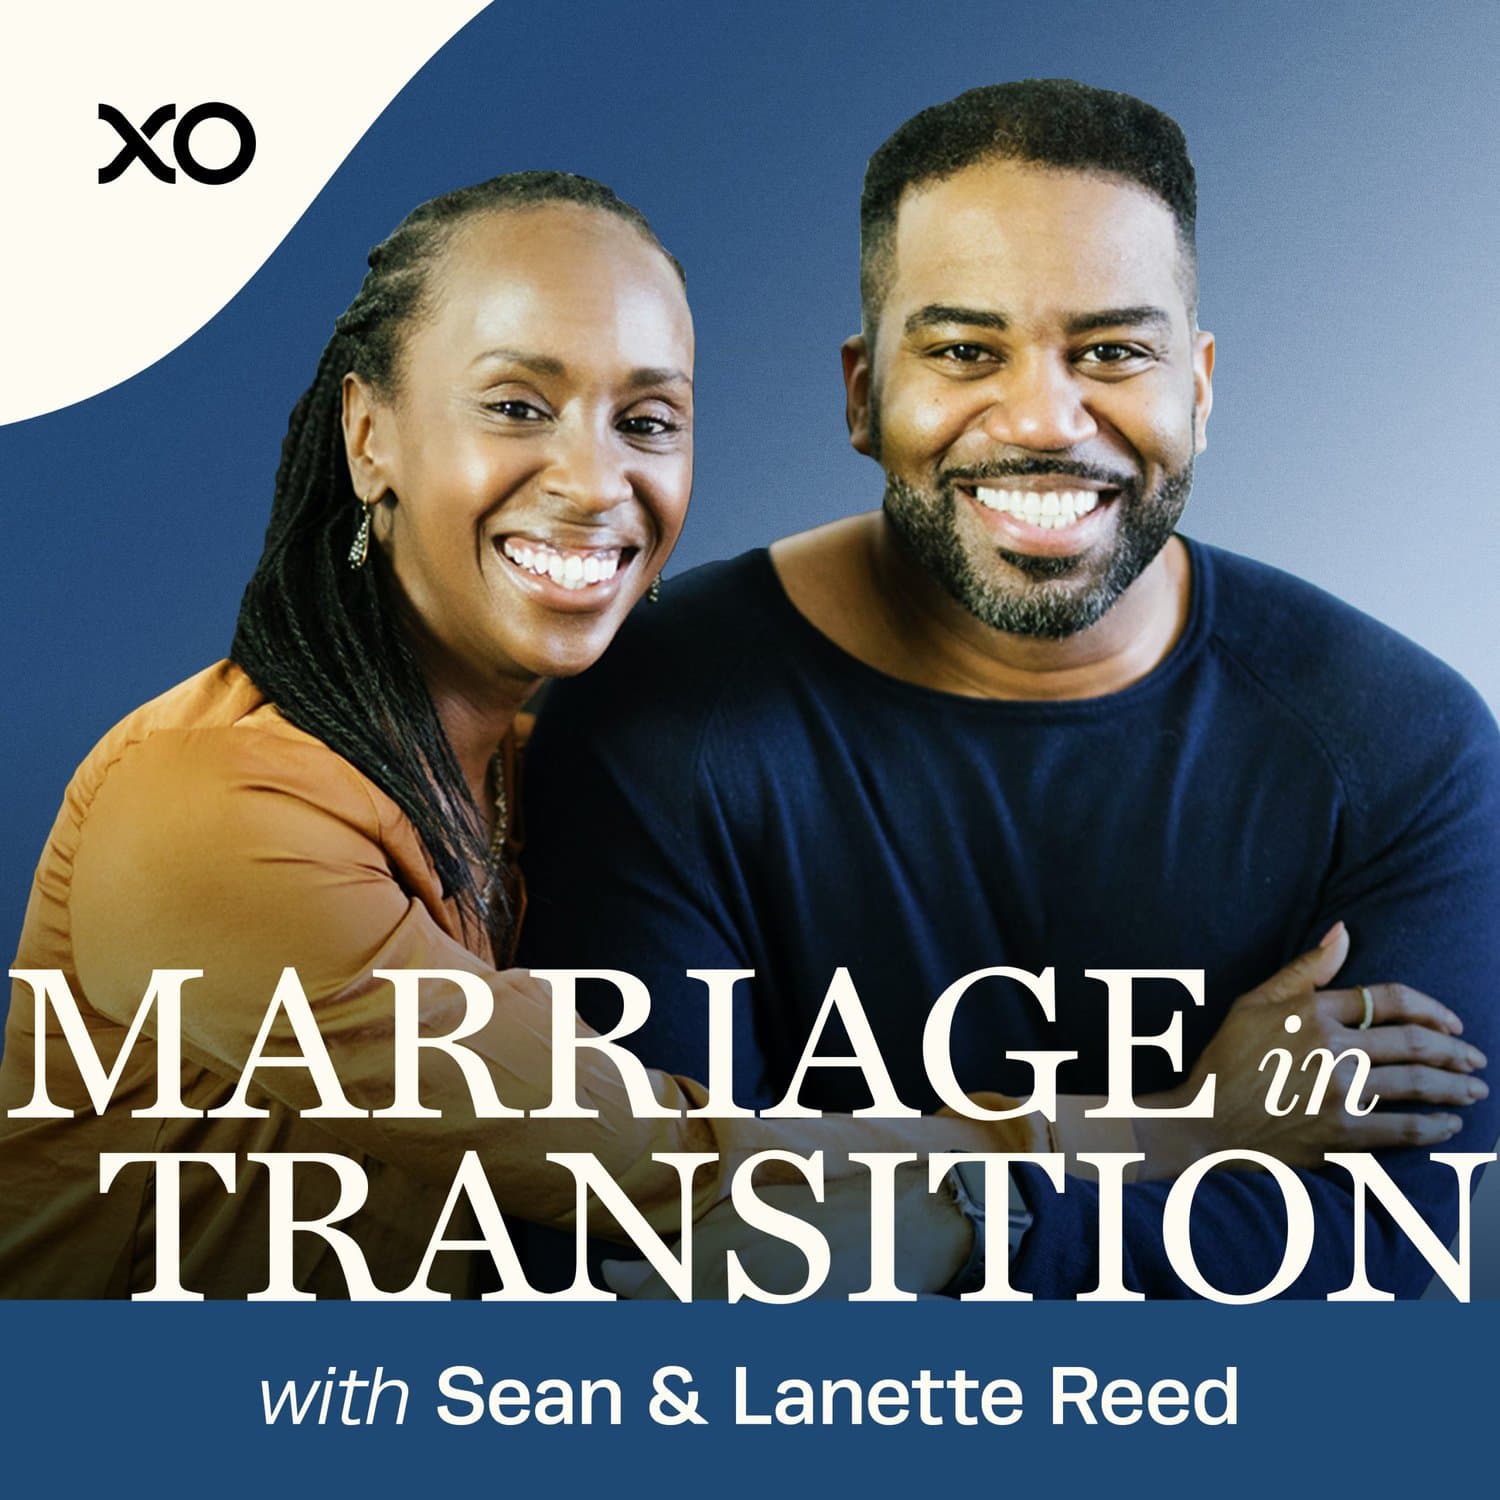 Introducing: The Two Equals One Marriage Podcast